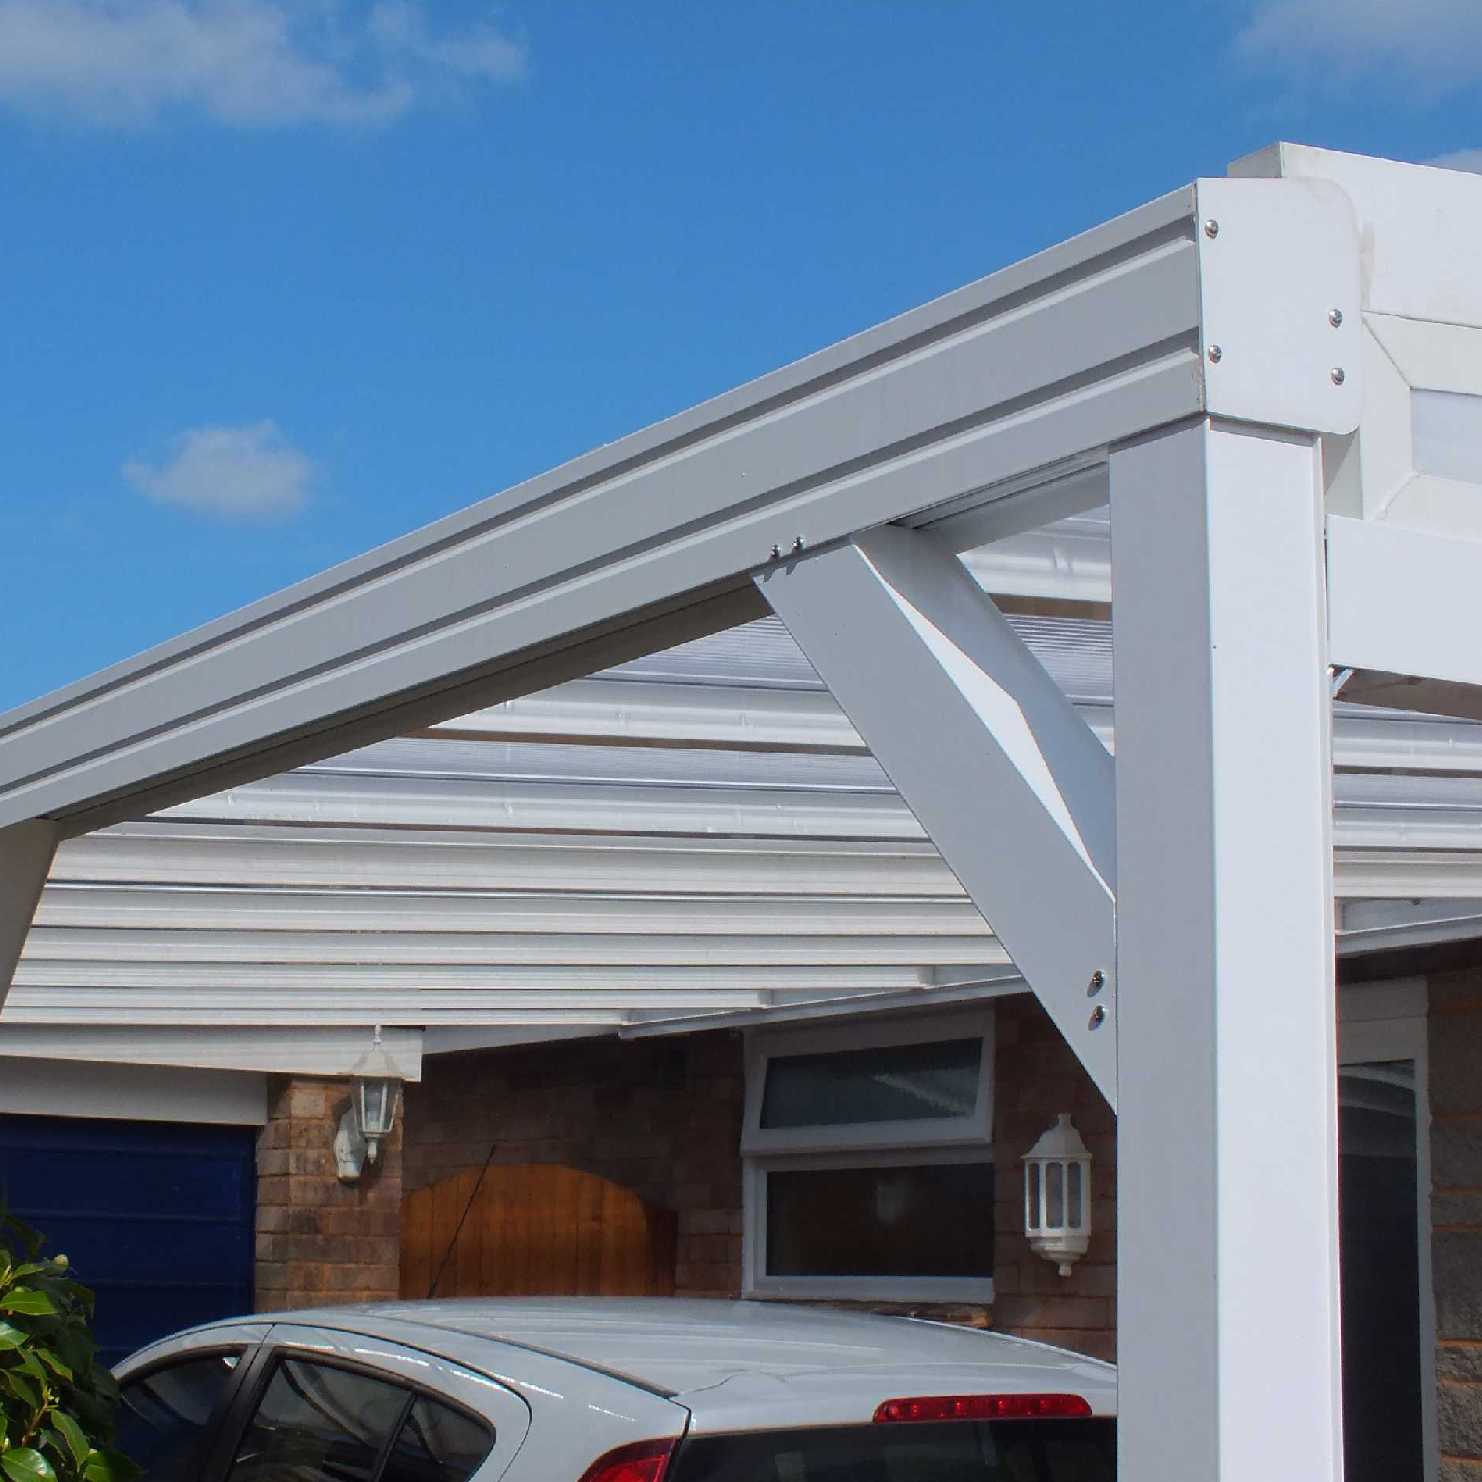 Great deals on Omega Smart Lean-To Canopy, White with 16mm Polycarbonate Glazing - 5.6m (W) x 3.5m (P), (3) Supporting Posts